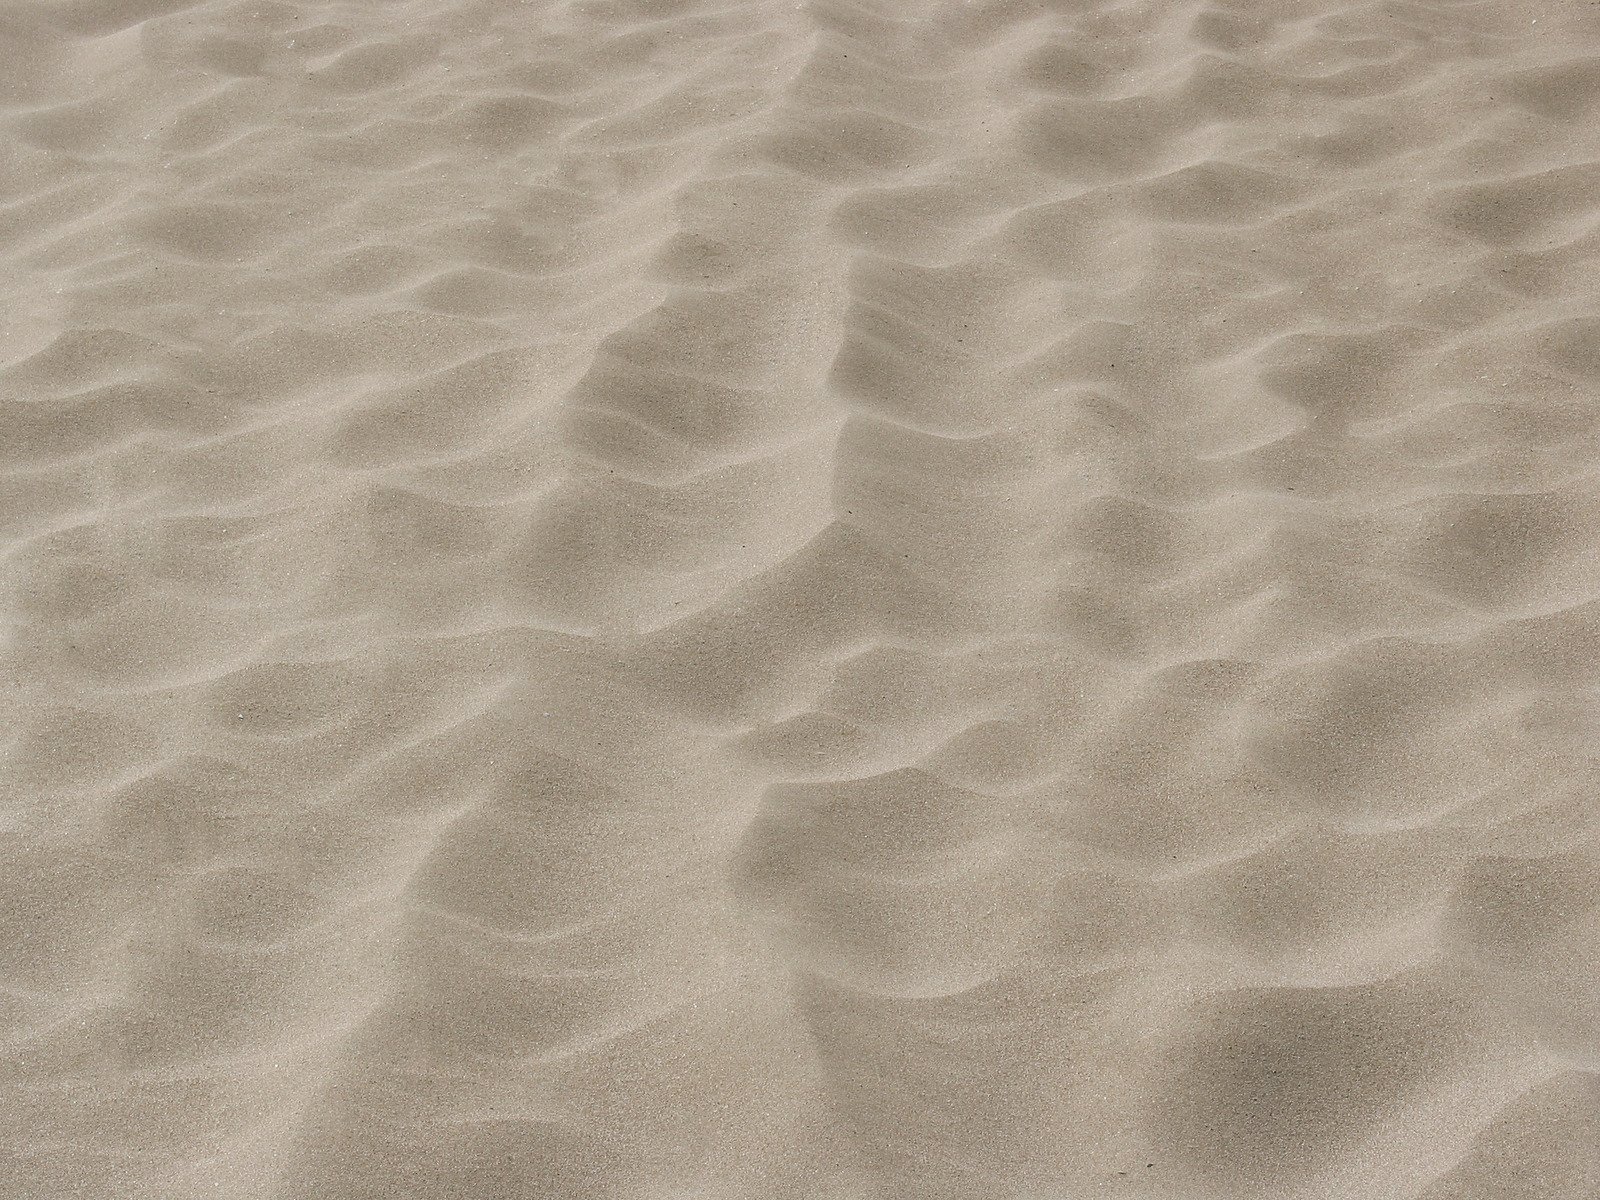 an area with a sand pattern and some white sand